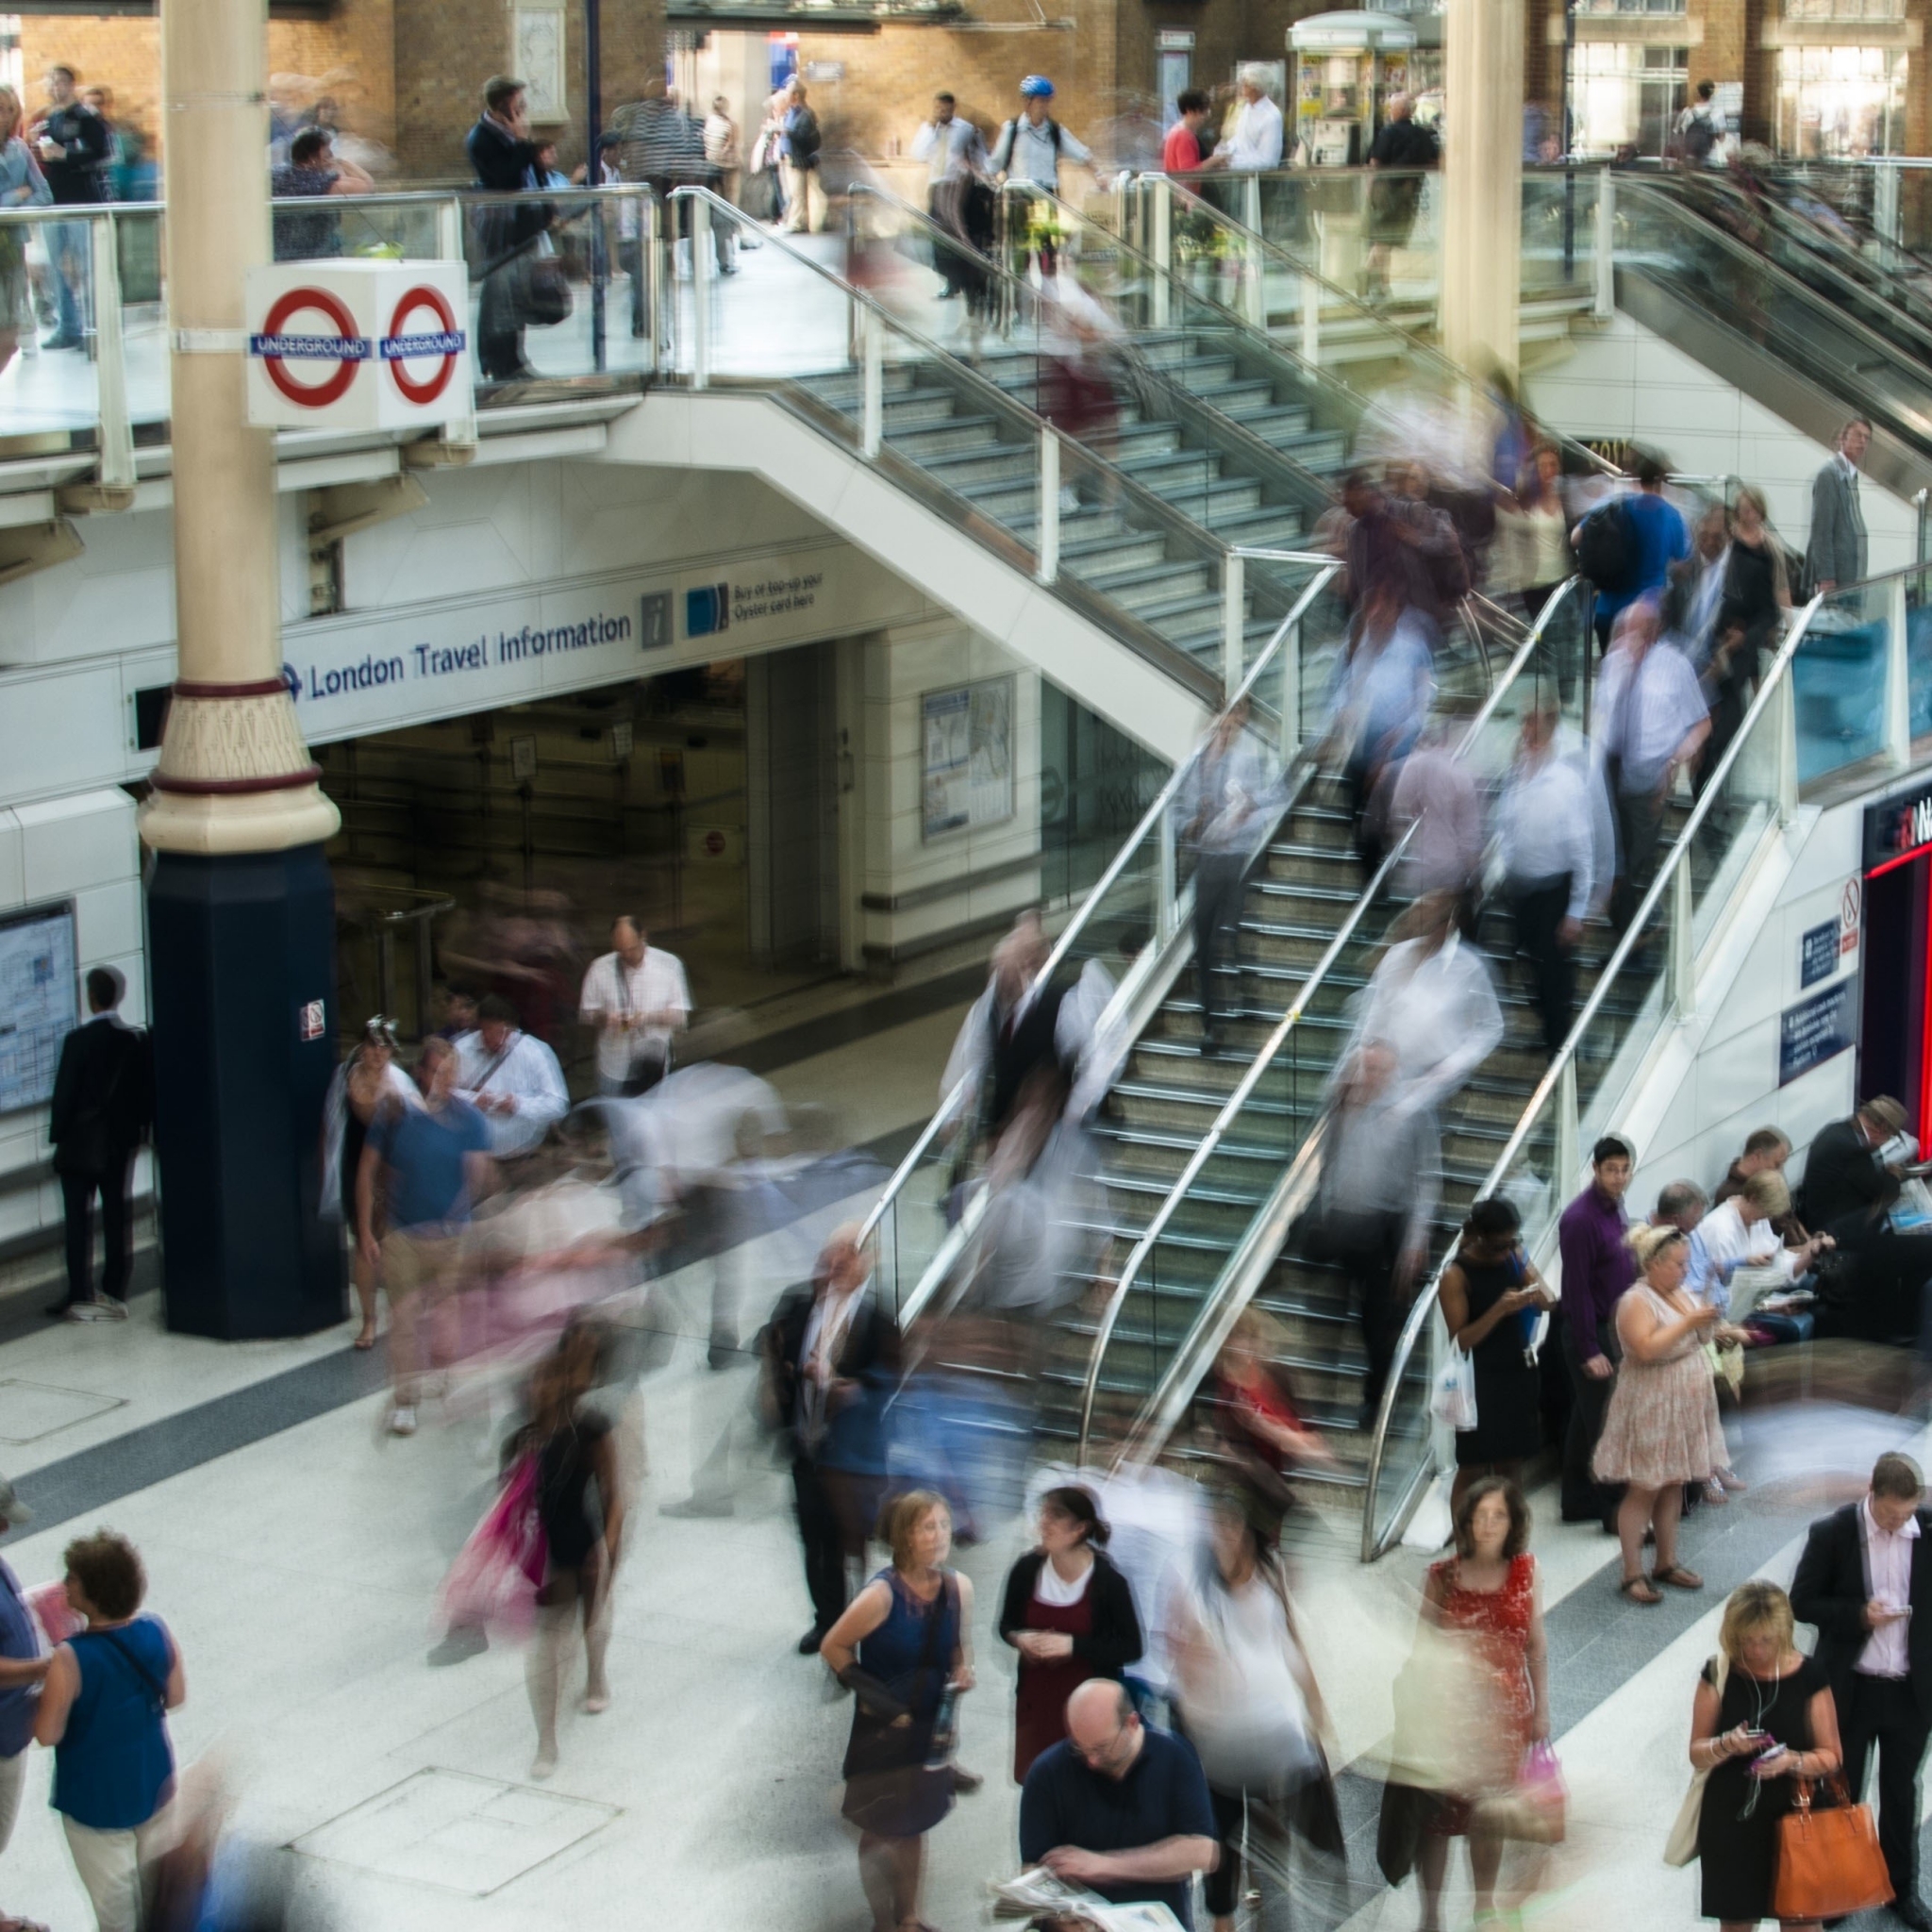 One fifth of UK workers do not intend to commute again post pandemic